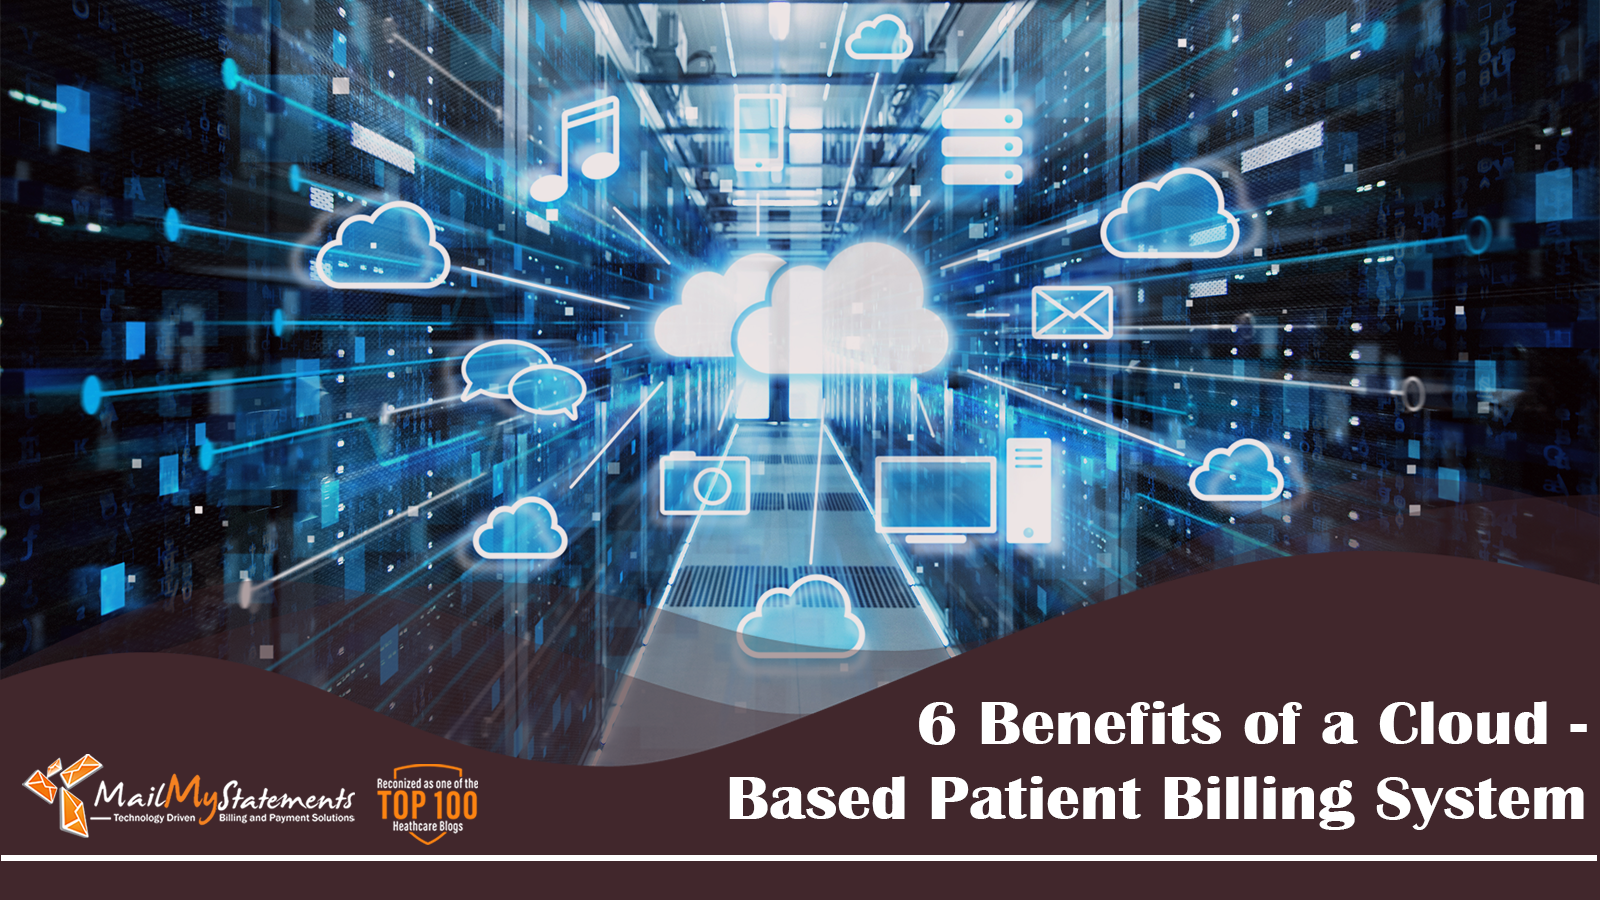 6 Benefits of a Cloud-Based Patient Billing System